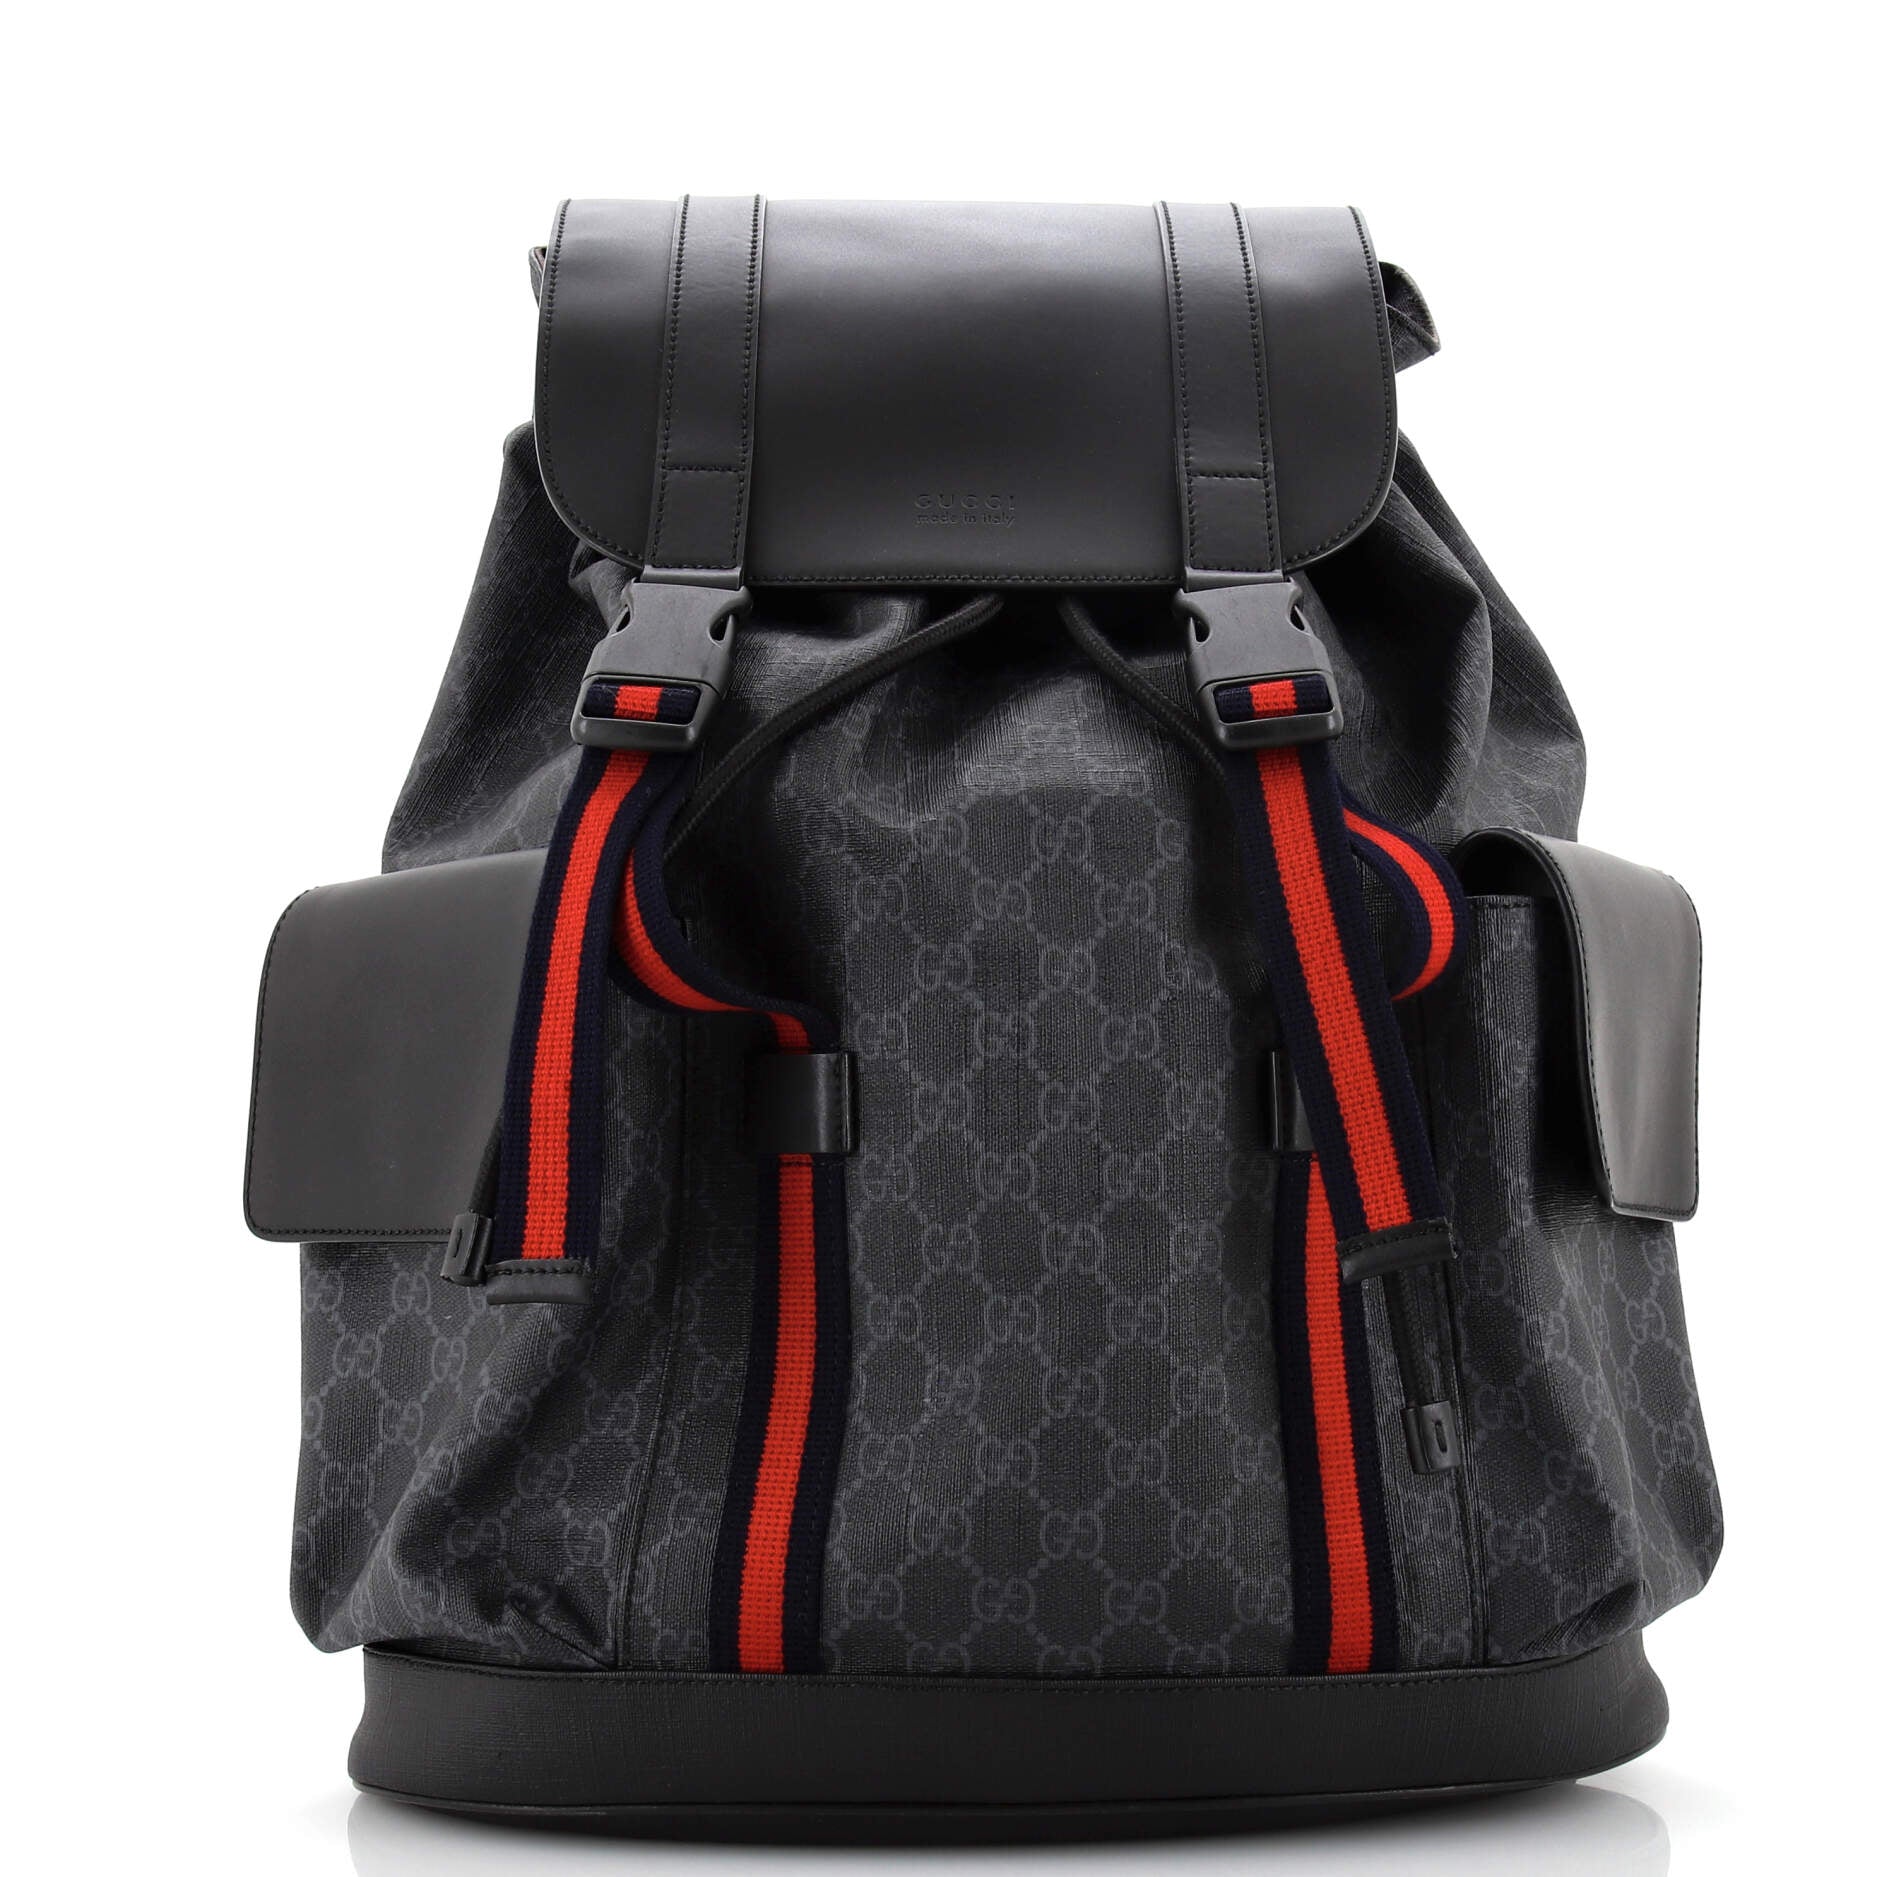 Double Pocket Buckle Backpack GG Coated Canvas Large